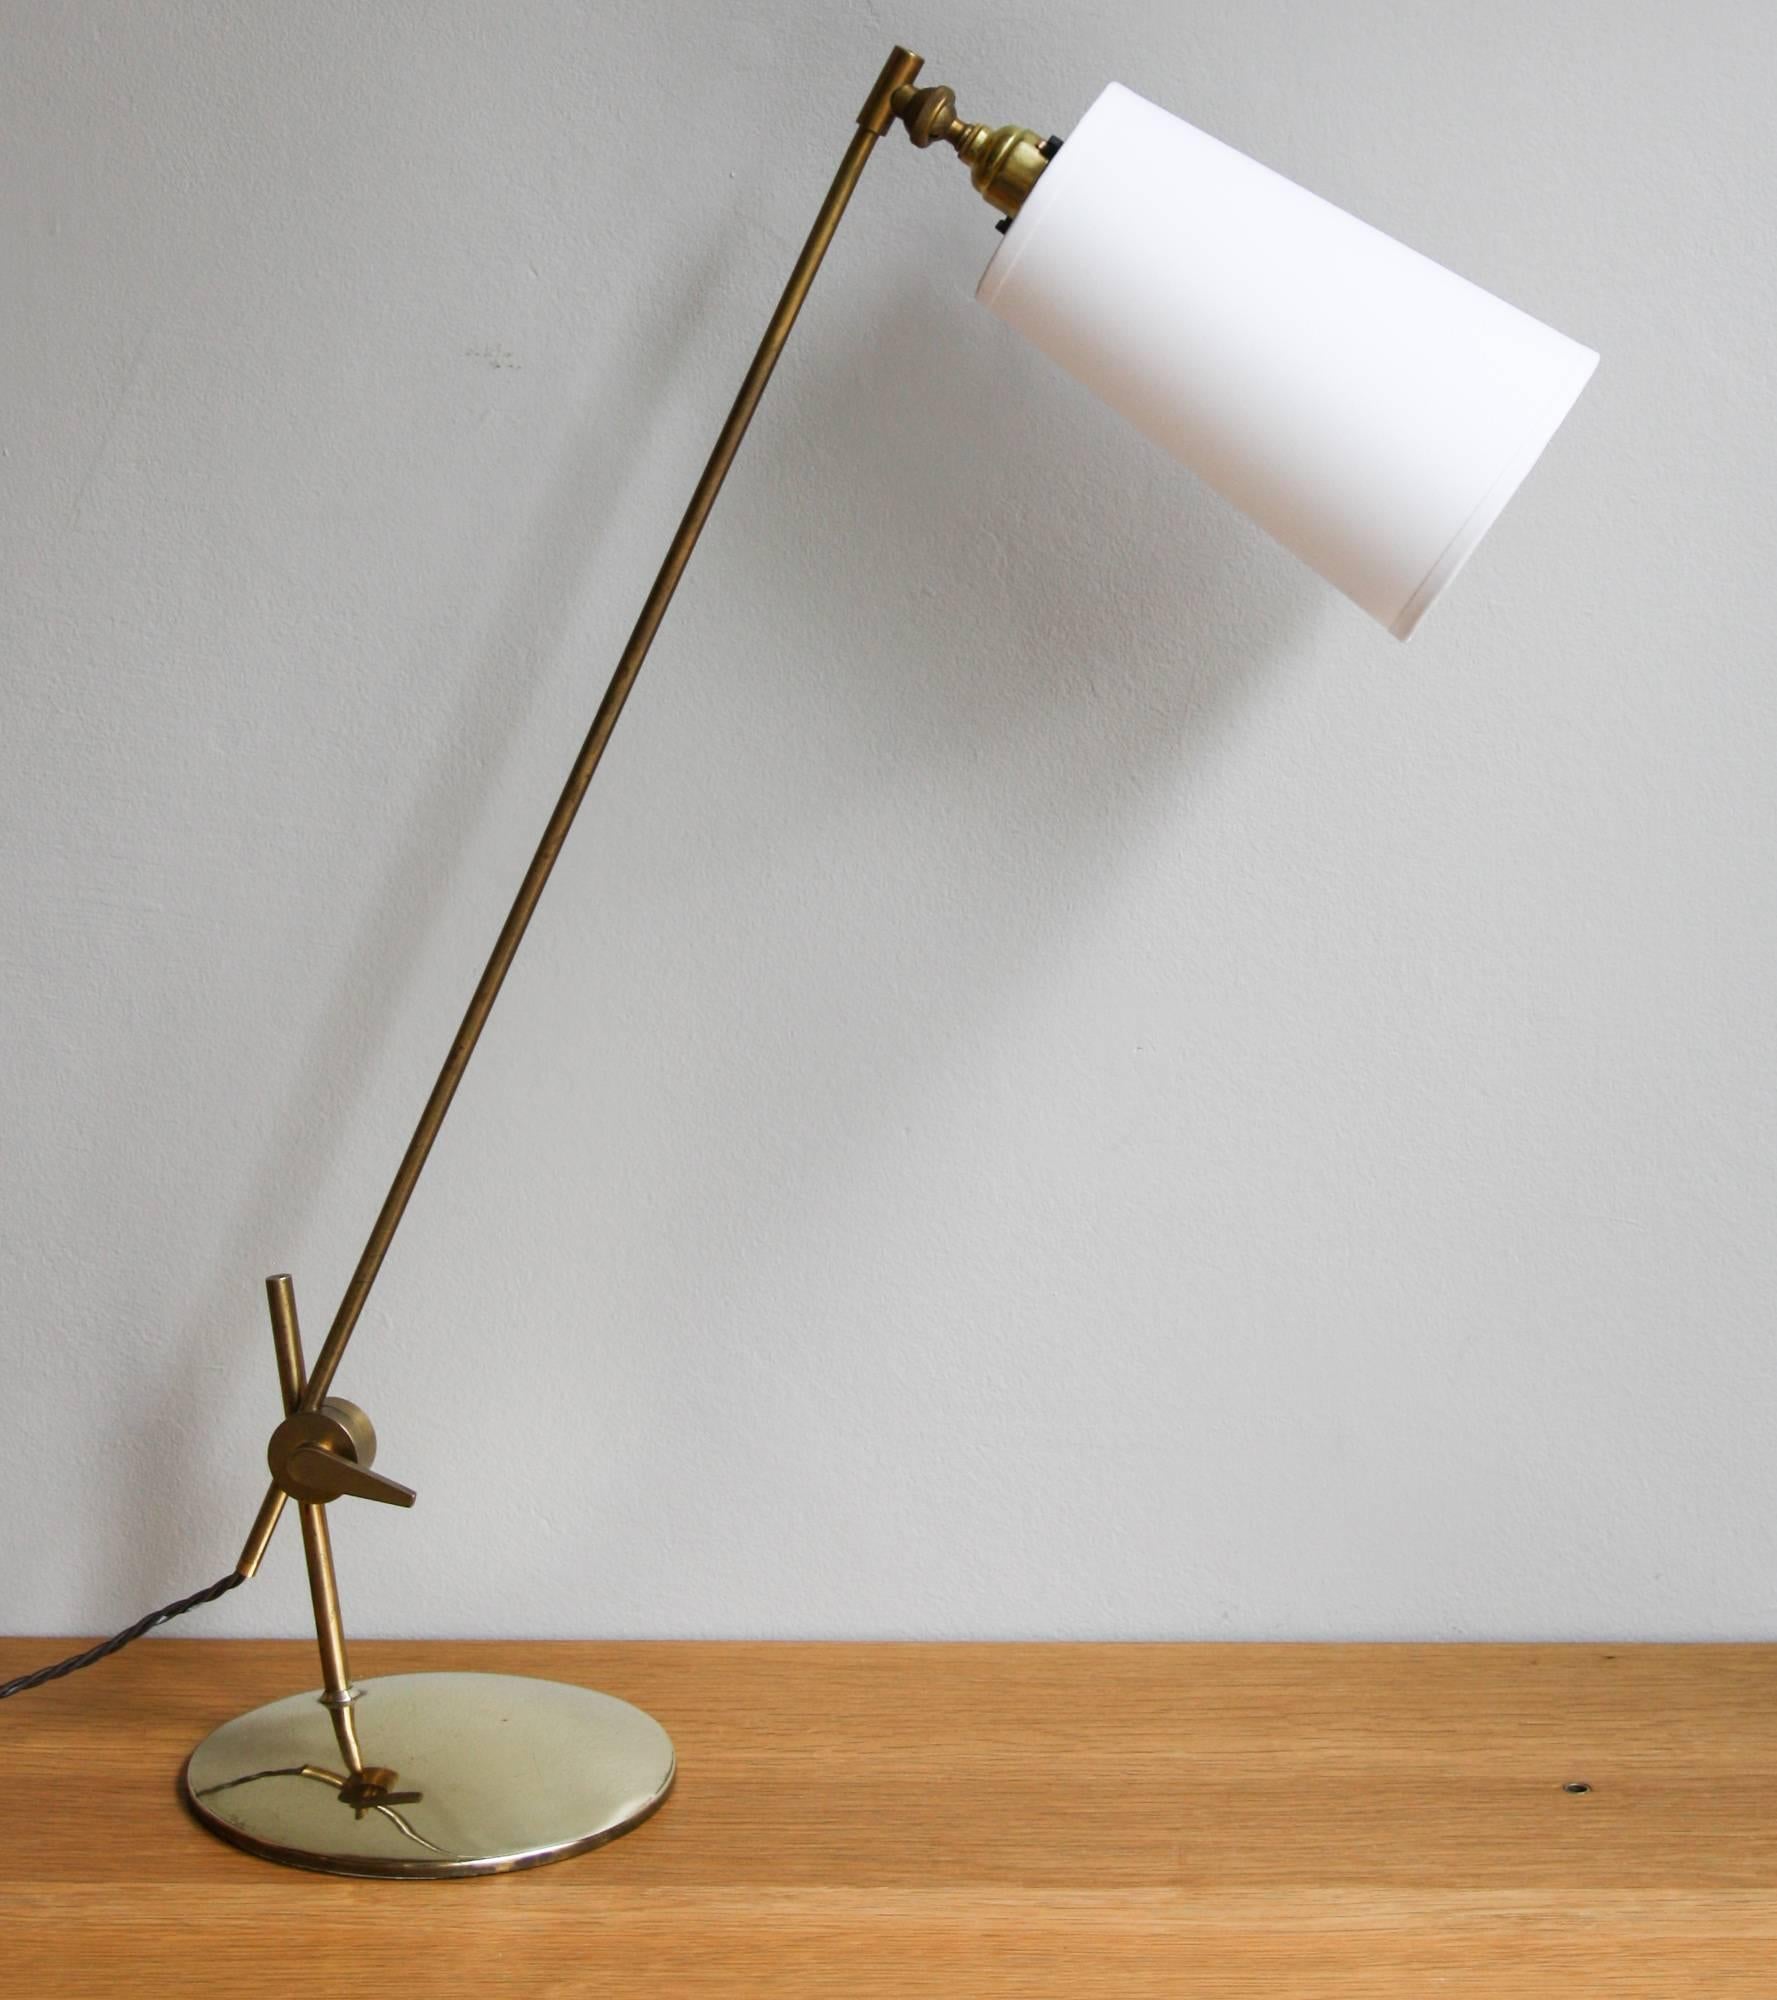 Vintage table lamp made by Le Klint, Denmark, 1960s.
The head can be moved around a 360 degree solid angle, while the arm's direction can be adjusted through the sculptural bracket, which in turn slides along the little stem.
In polished brass